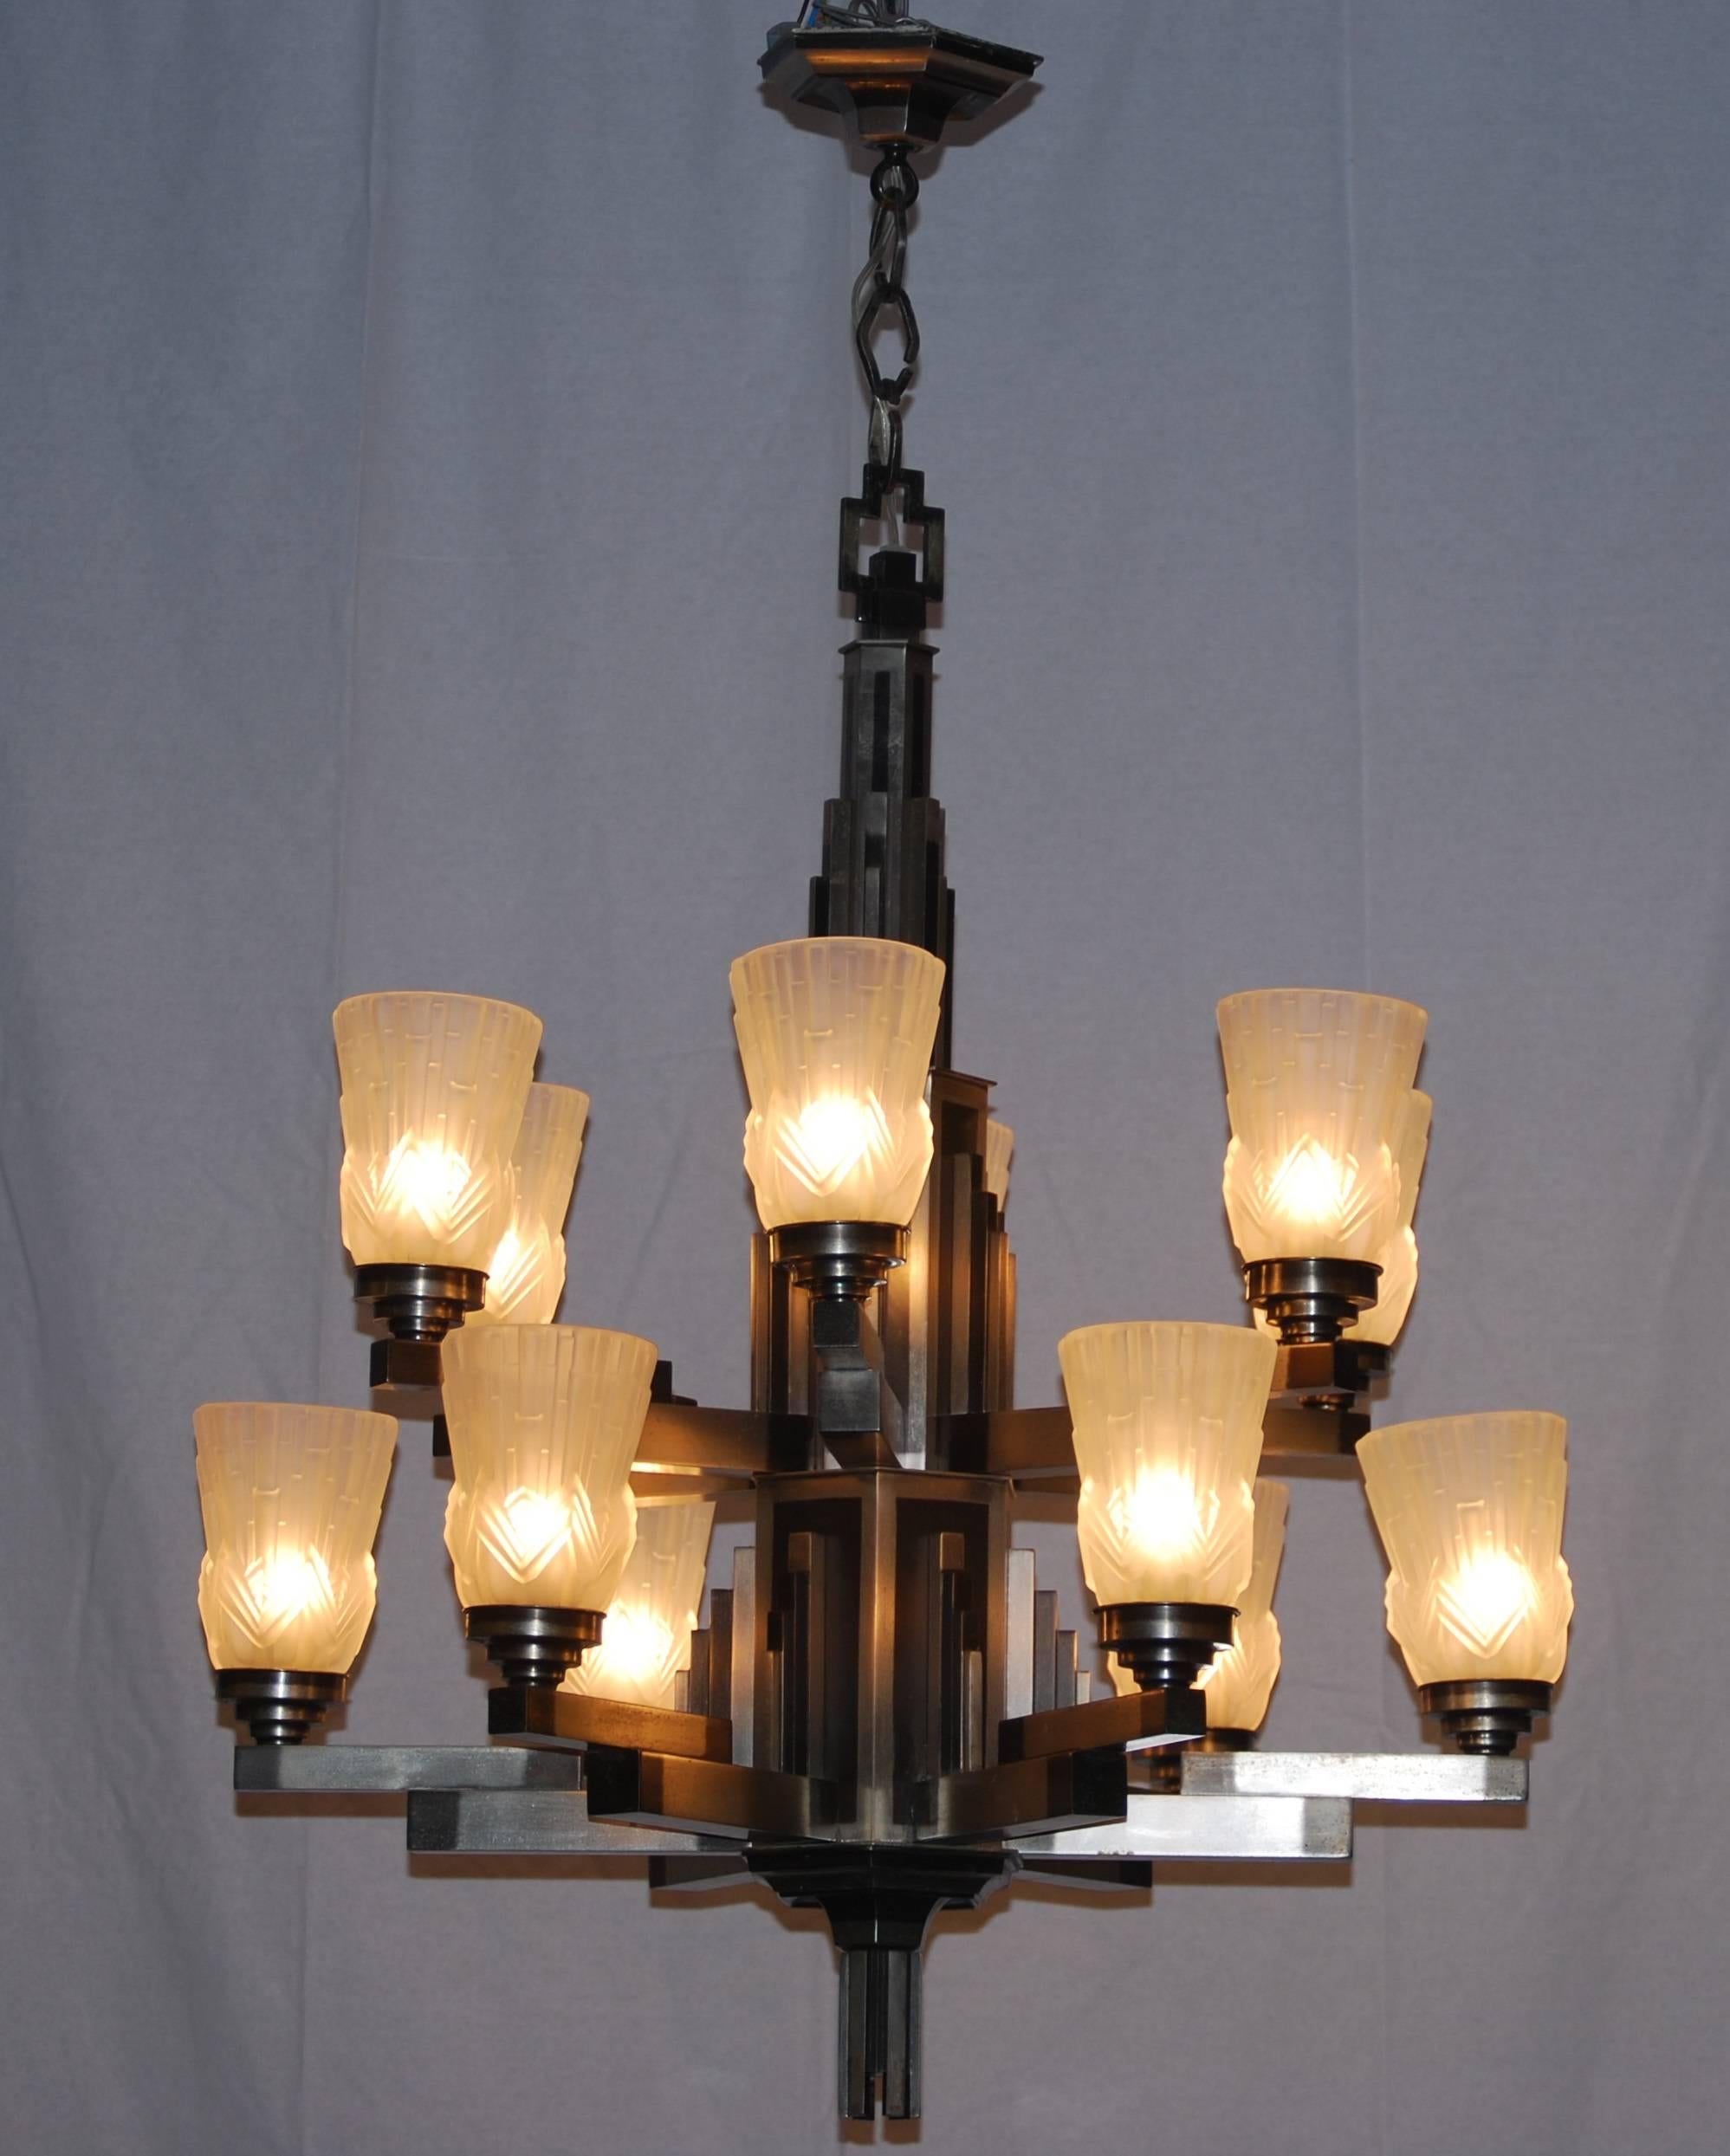 One-of-a-kind!.
This cubist 12 lights nickel with black details chandelier is recently restored.
12 frosted glass chades are mounted on the arms.
This chandelier is made in France in the Art Deco period 1920-1930.
     
       